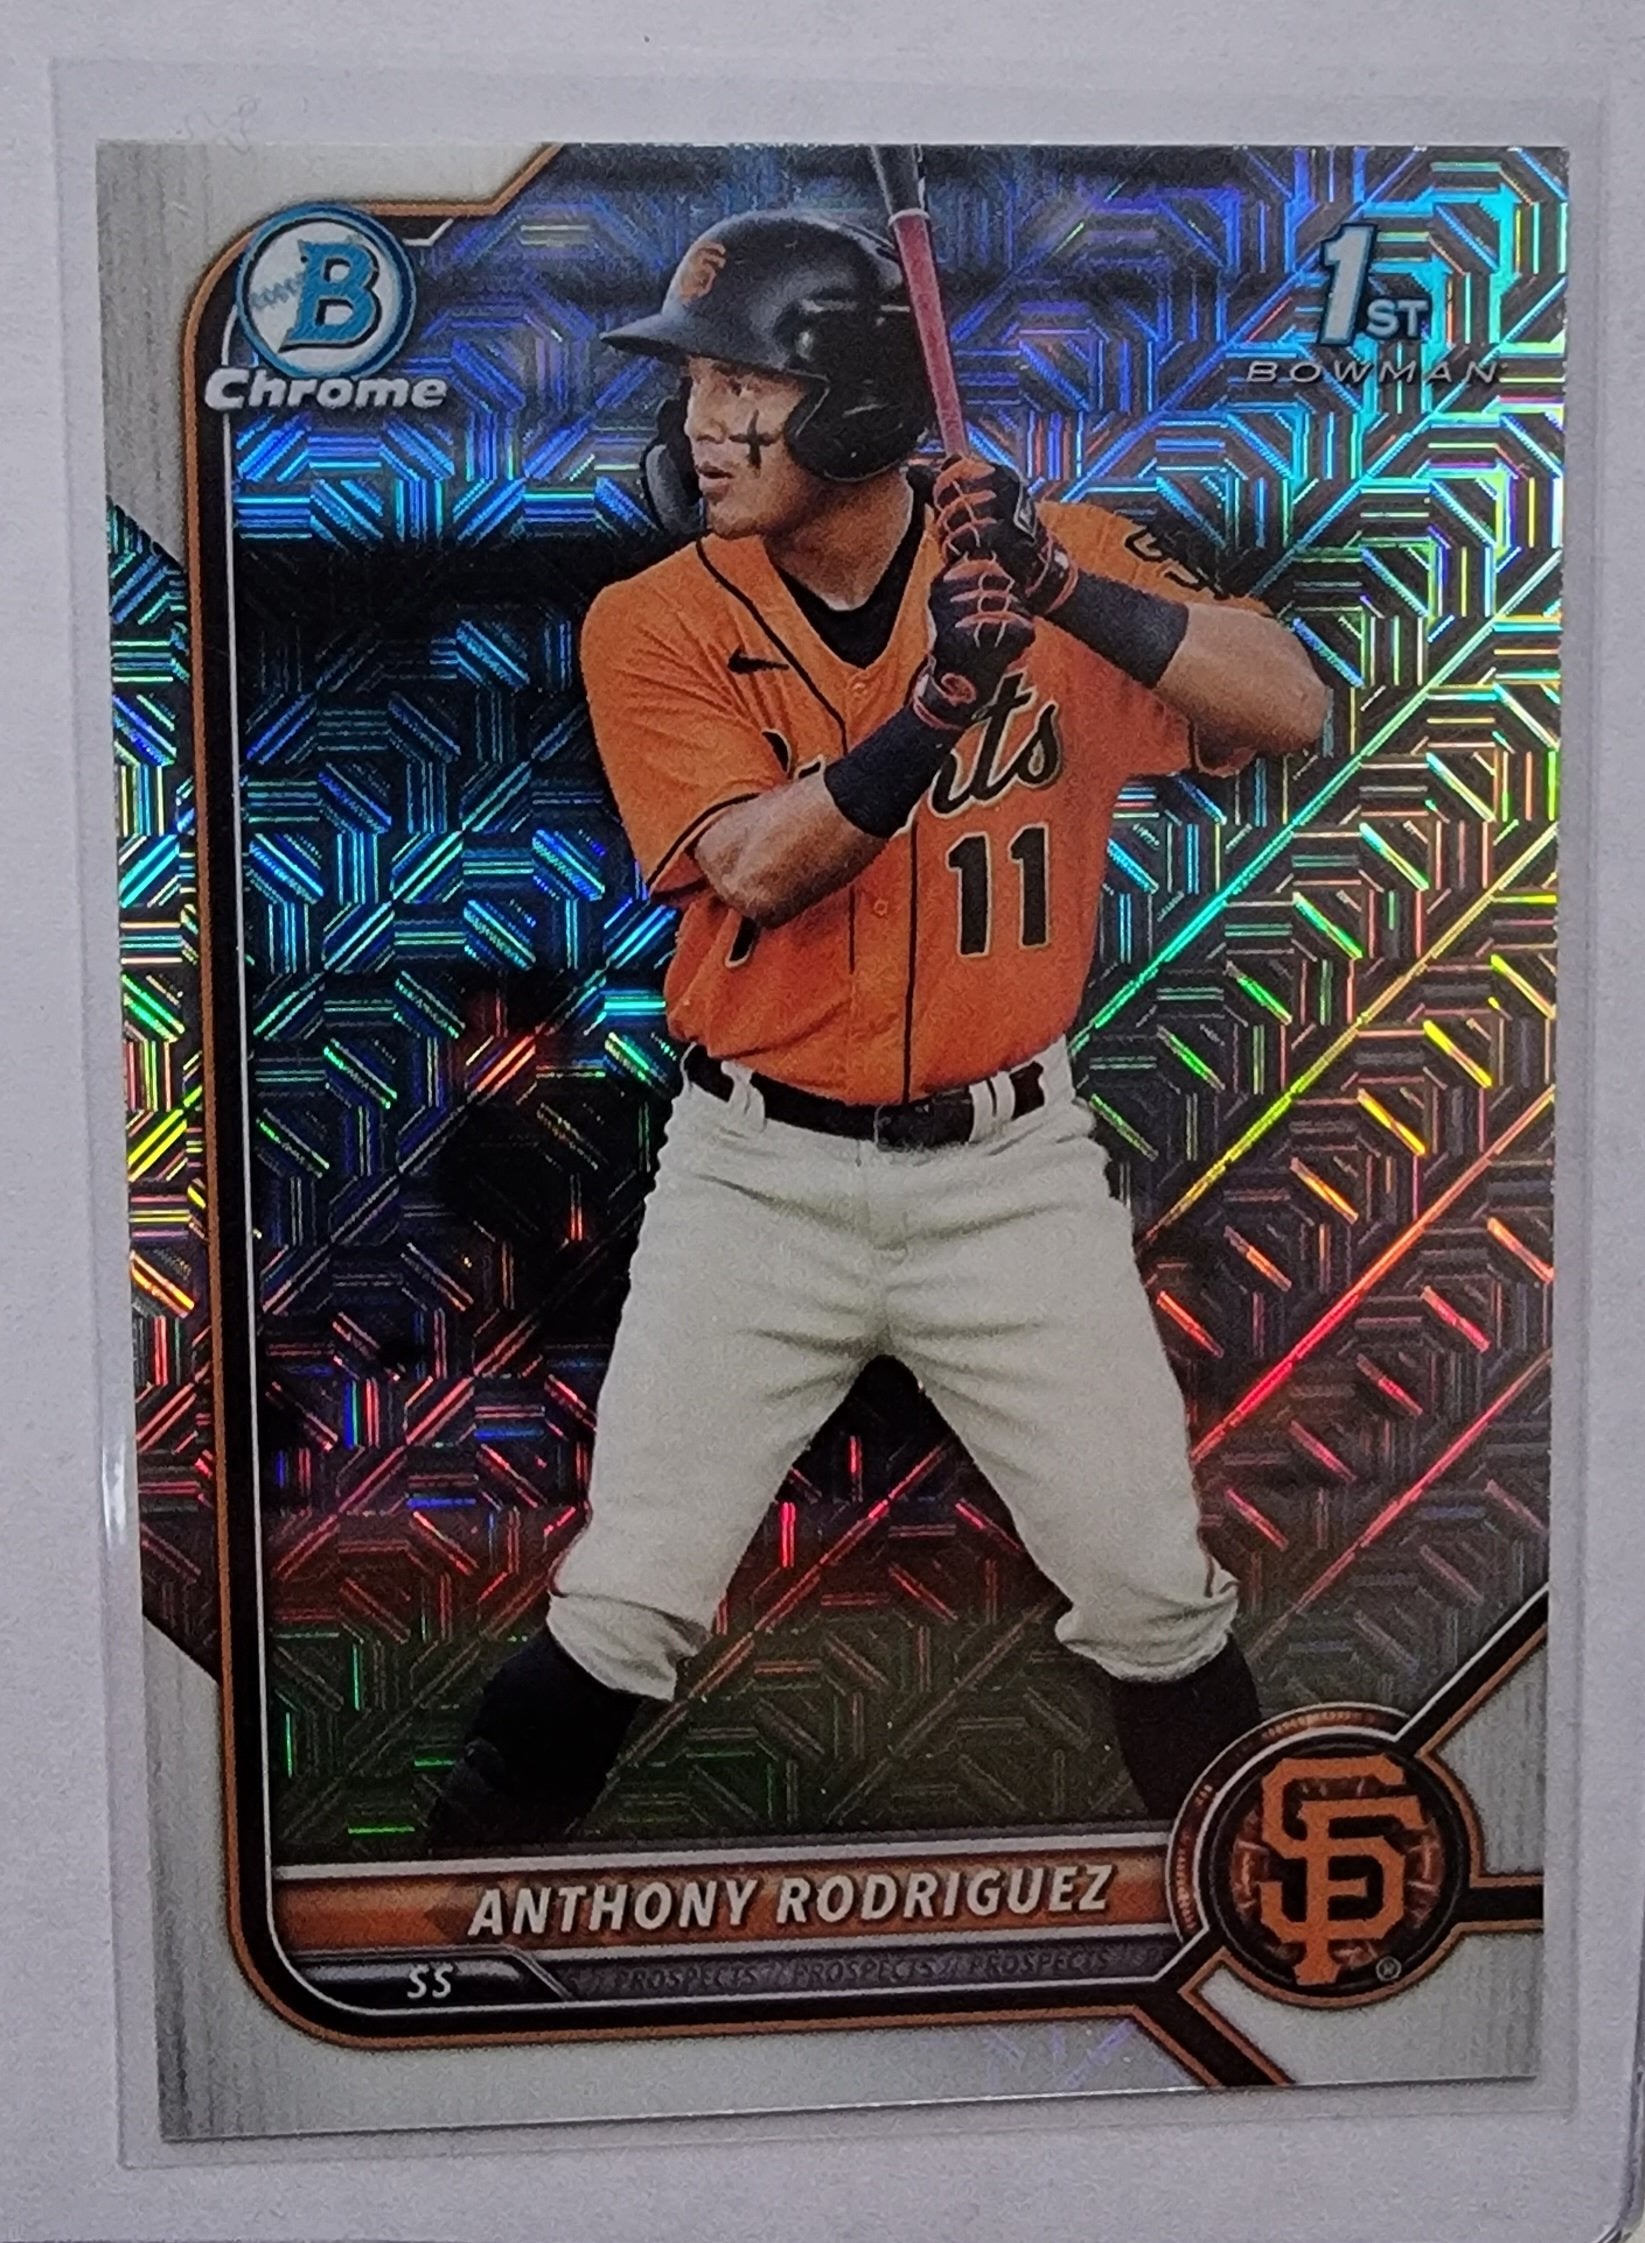 2022 Bowman Anthony Rodriguez Mojo Refractor Baseball Card AVM1 simple Xclusive Collectibles   